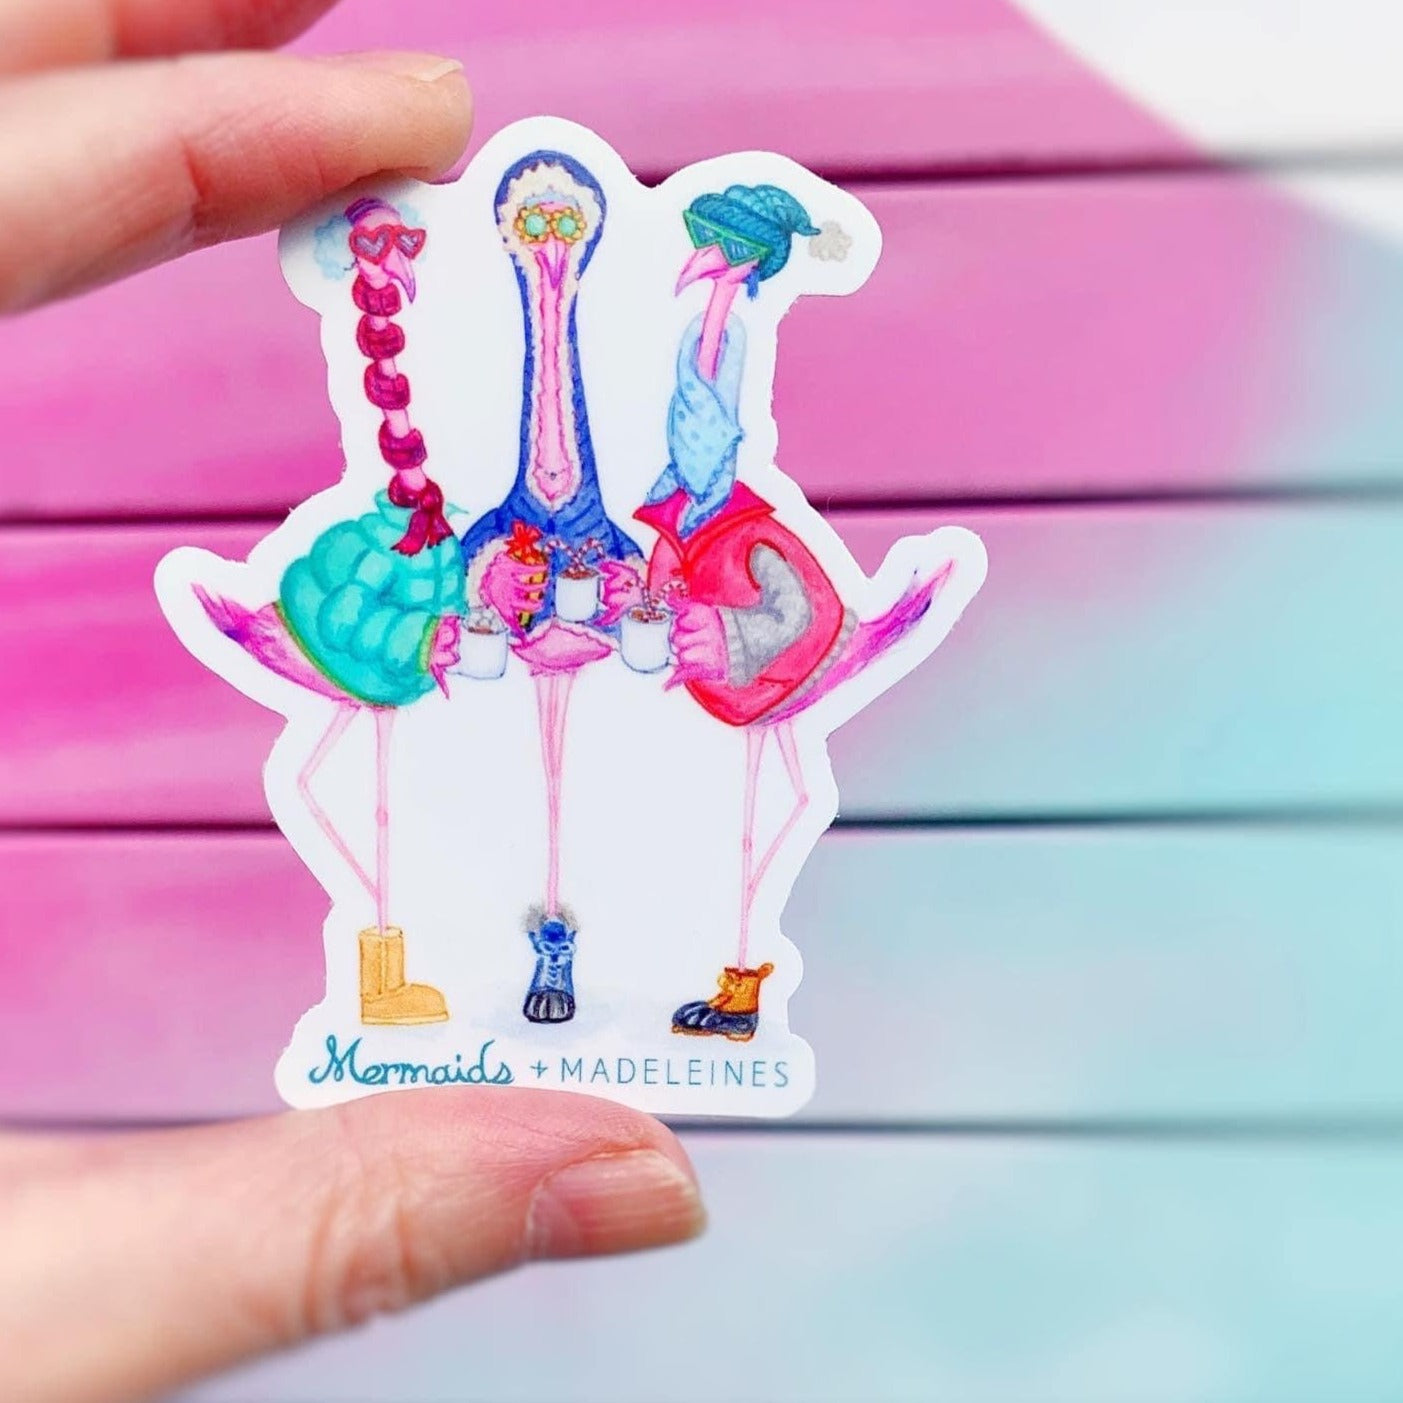 holiday flamingal vinyl sticker by mermaids and madeleines. this is a photograph of a vinyl sticker of 3 flamingos dressed in winter clothing illustrated by Heather Auclair Welch. The sticker is held up in a hand with a pink and aqua color backdrop